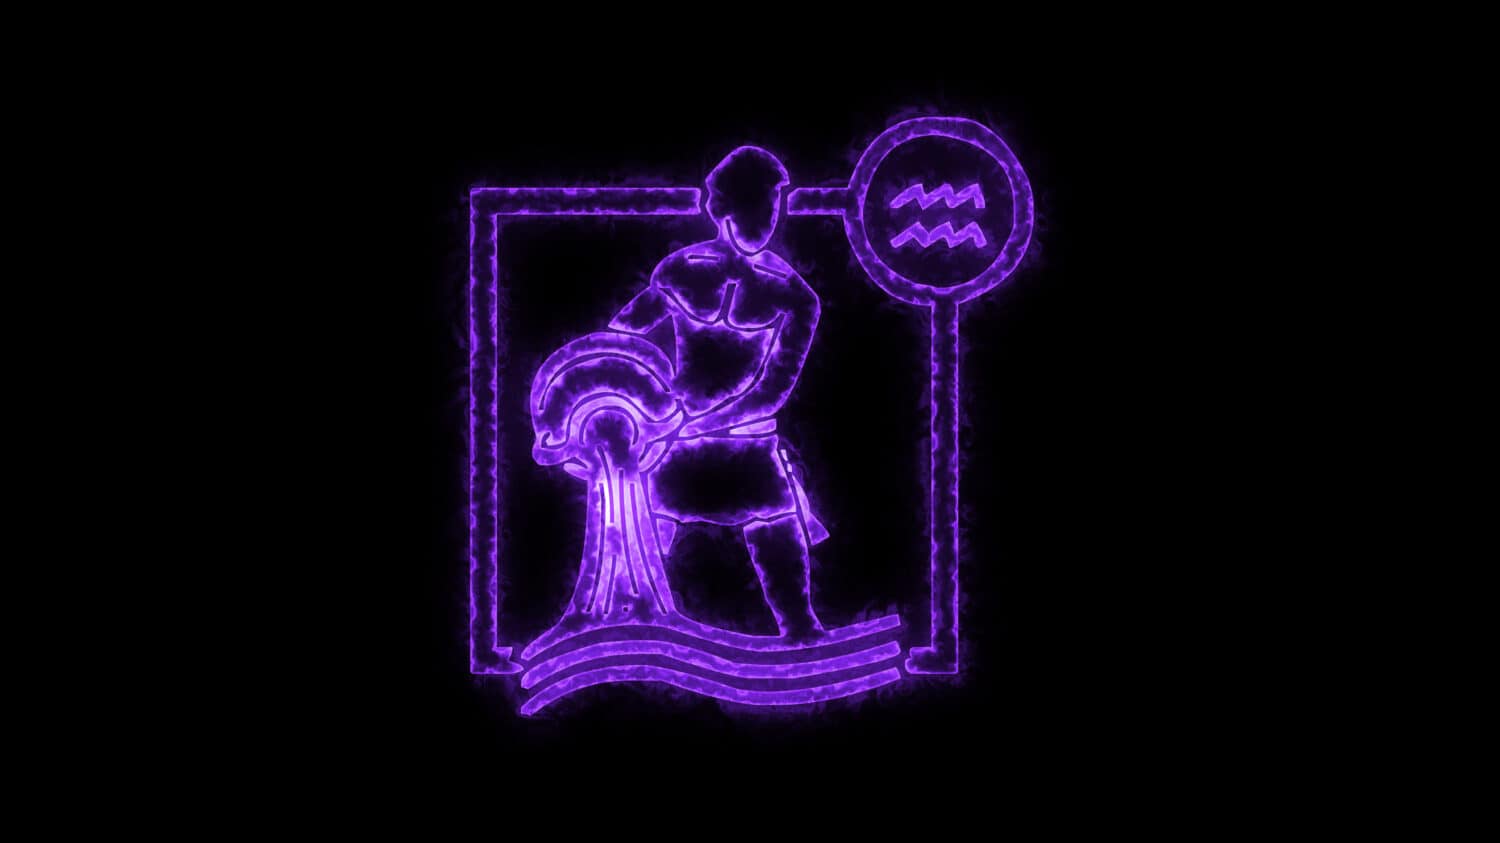 The Aquarius zodiac symbol, horoscope sign lighting effect purple neon glow. Royalty high-quality free stock of Aquarius sign isolated on black background. Horoscope, astrology icons with simple style